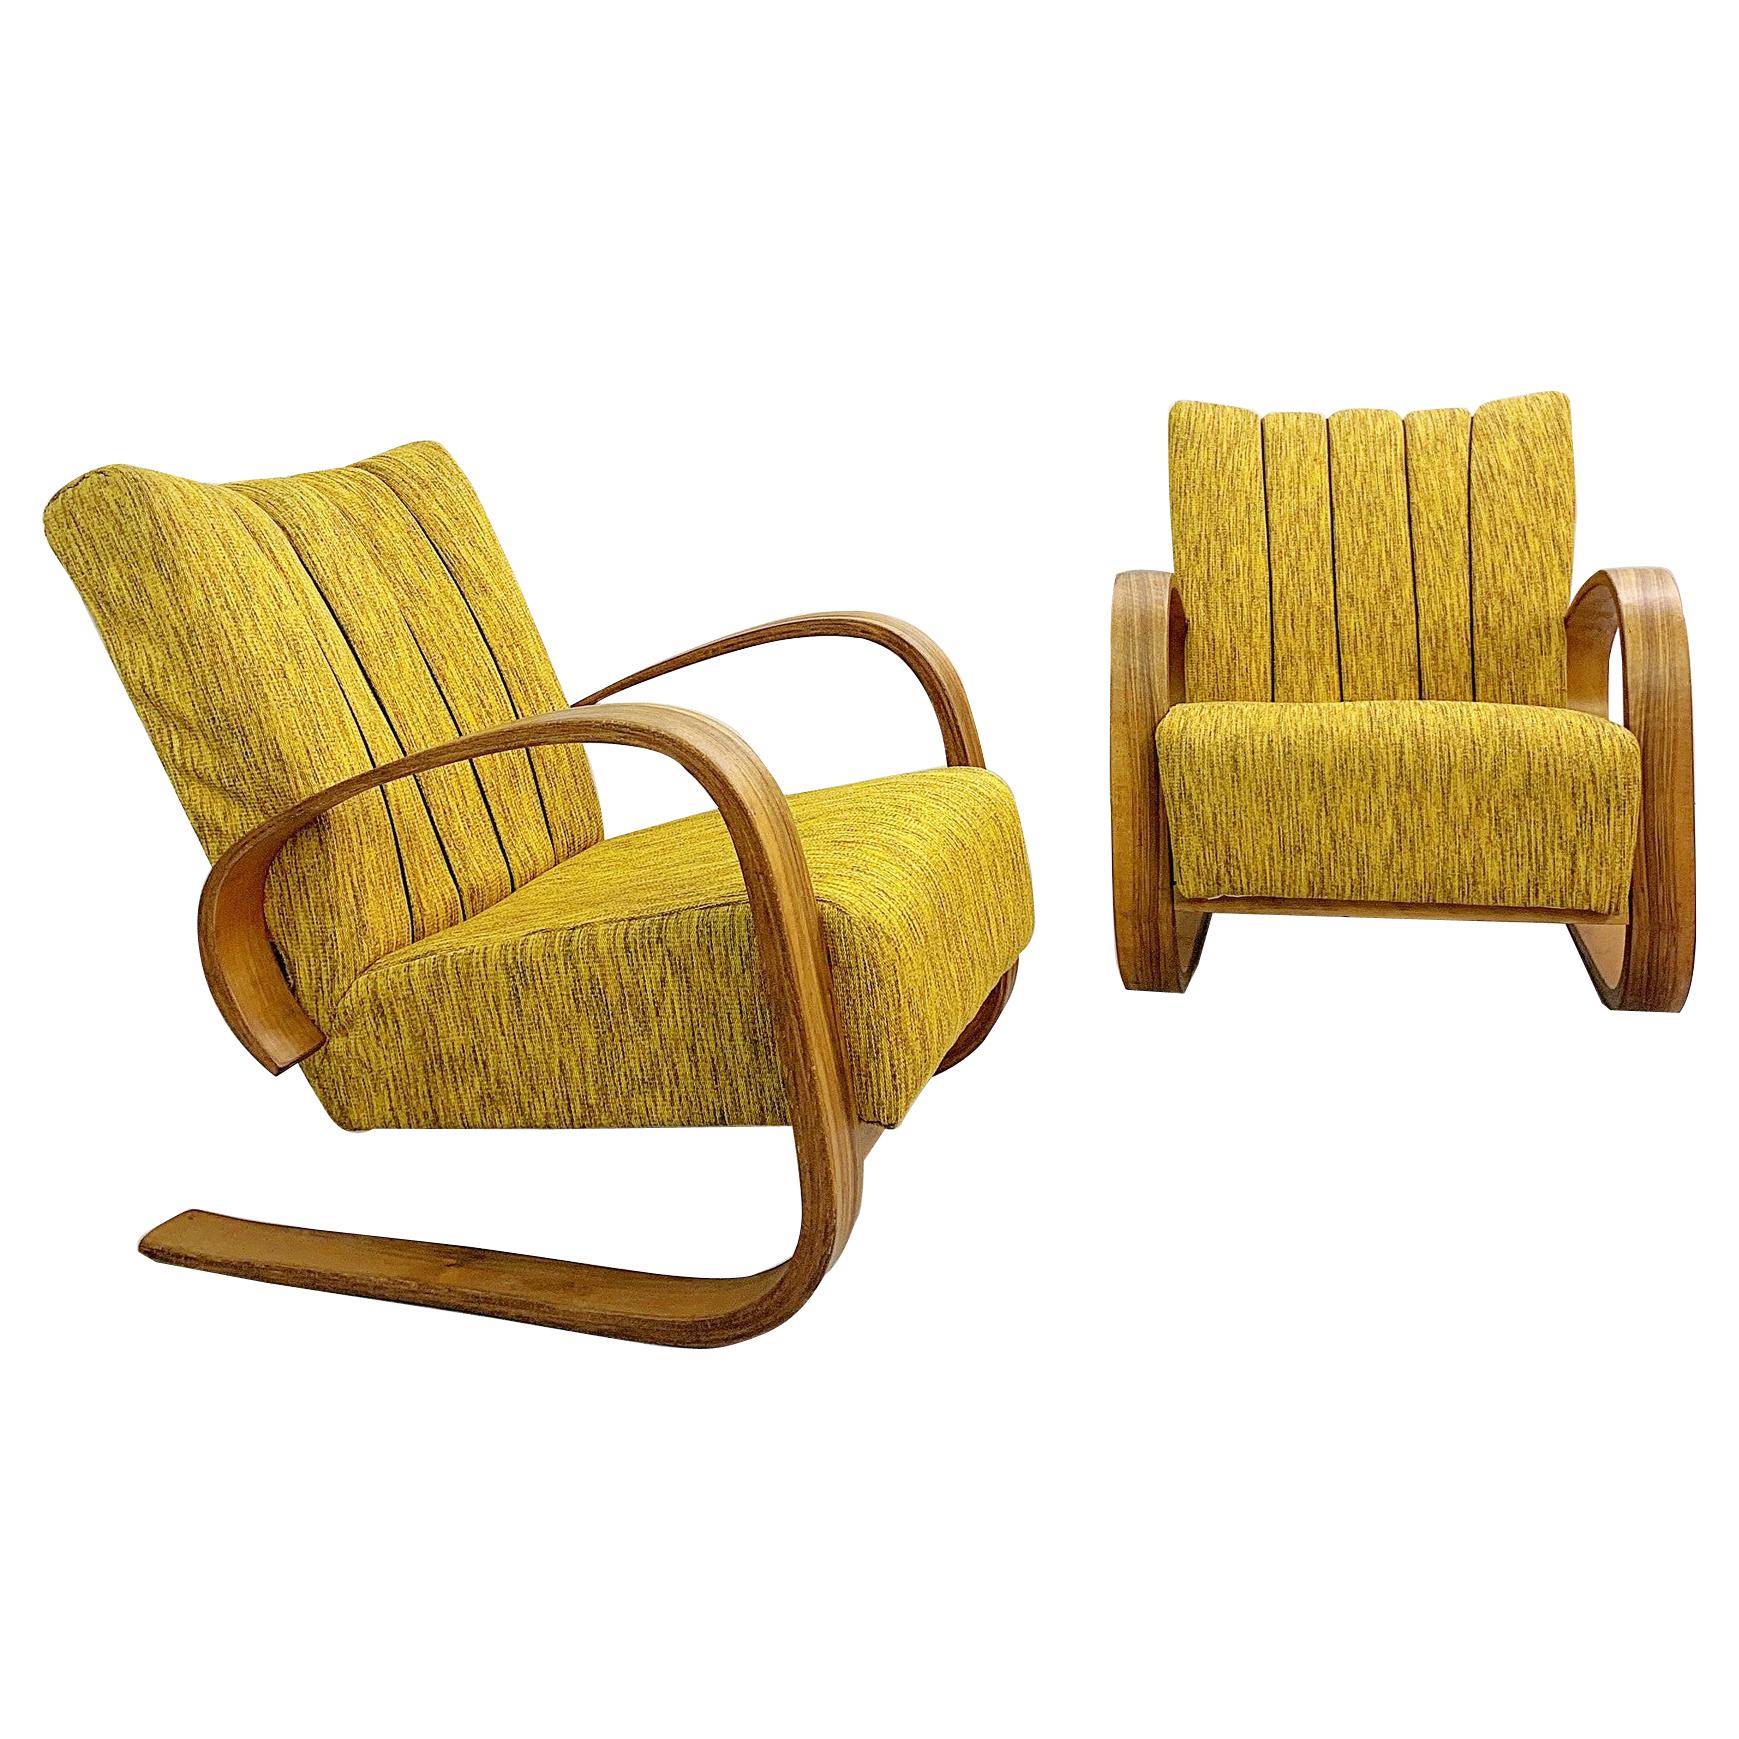 Pair of Lounge Chairs by Miroslav Navratil, 1930s